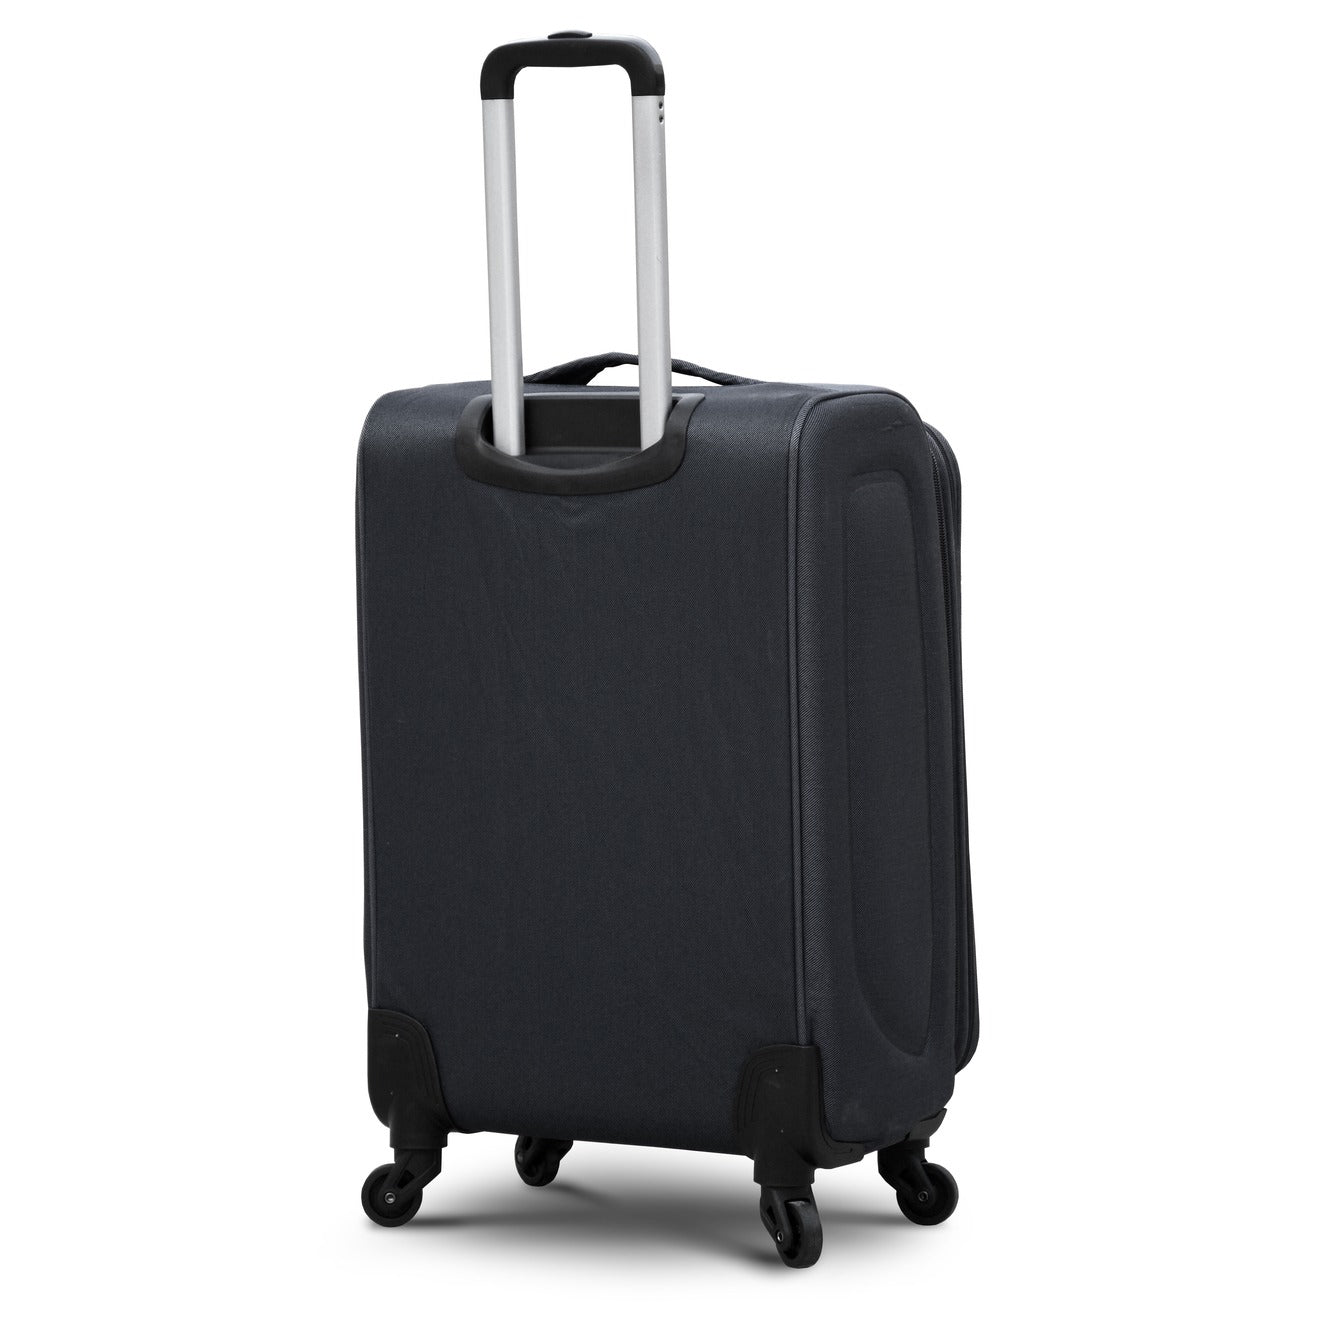 Soft Material Lightweight 10 Kg - 20 Inches JIAN 4 Wheel Black Luggage